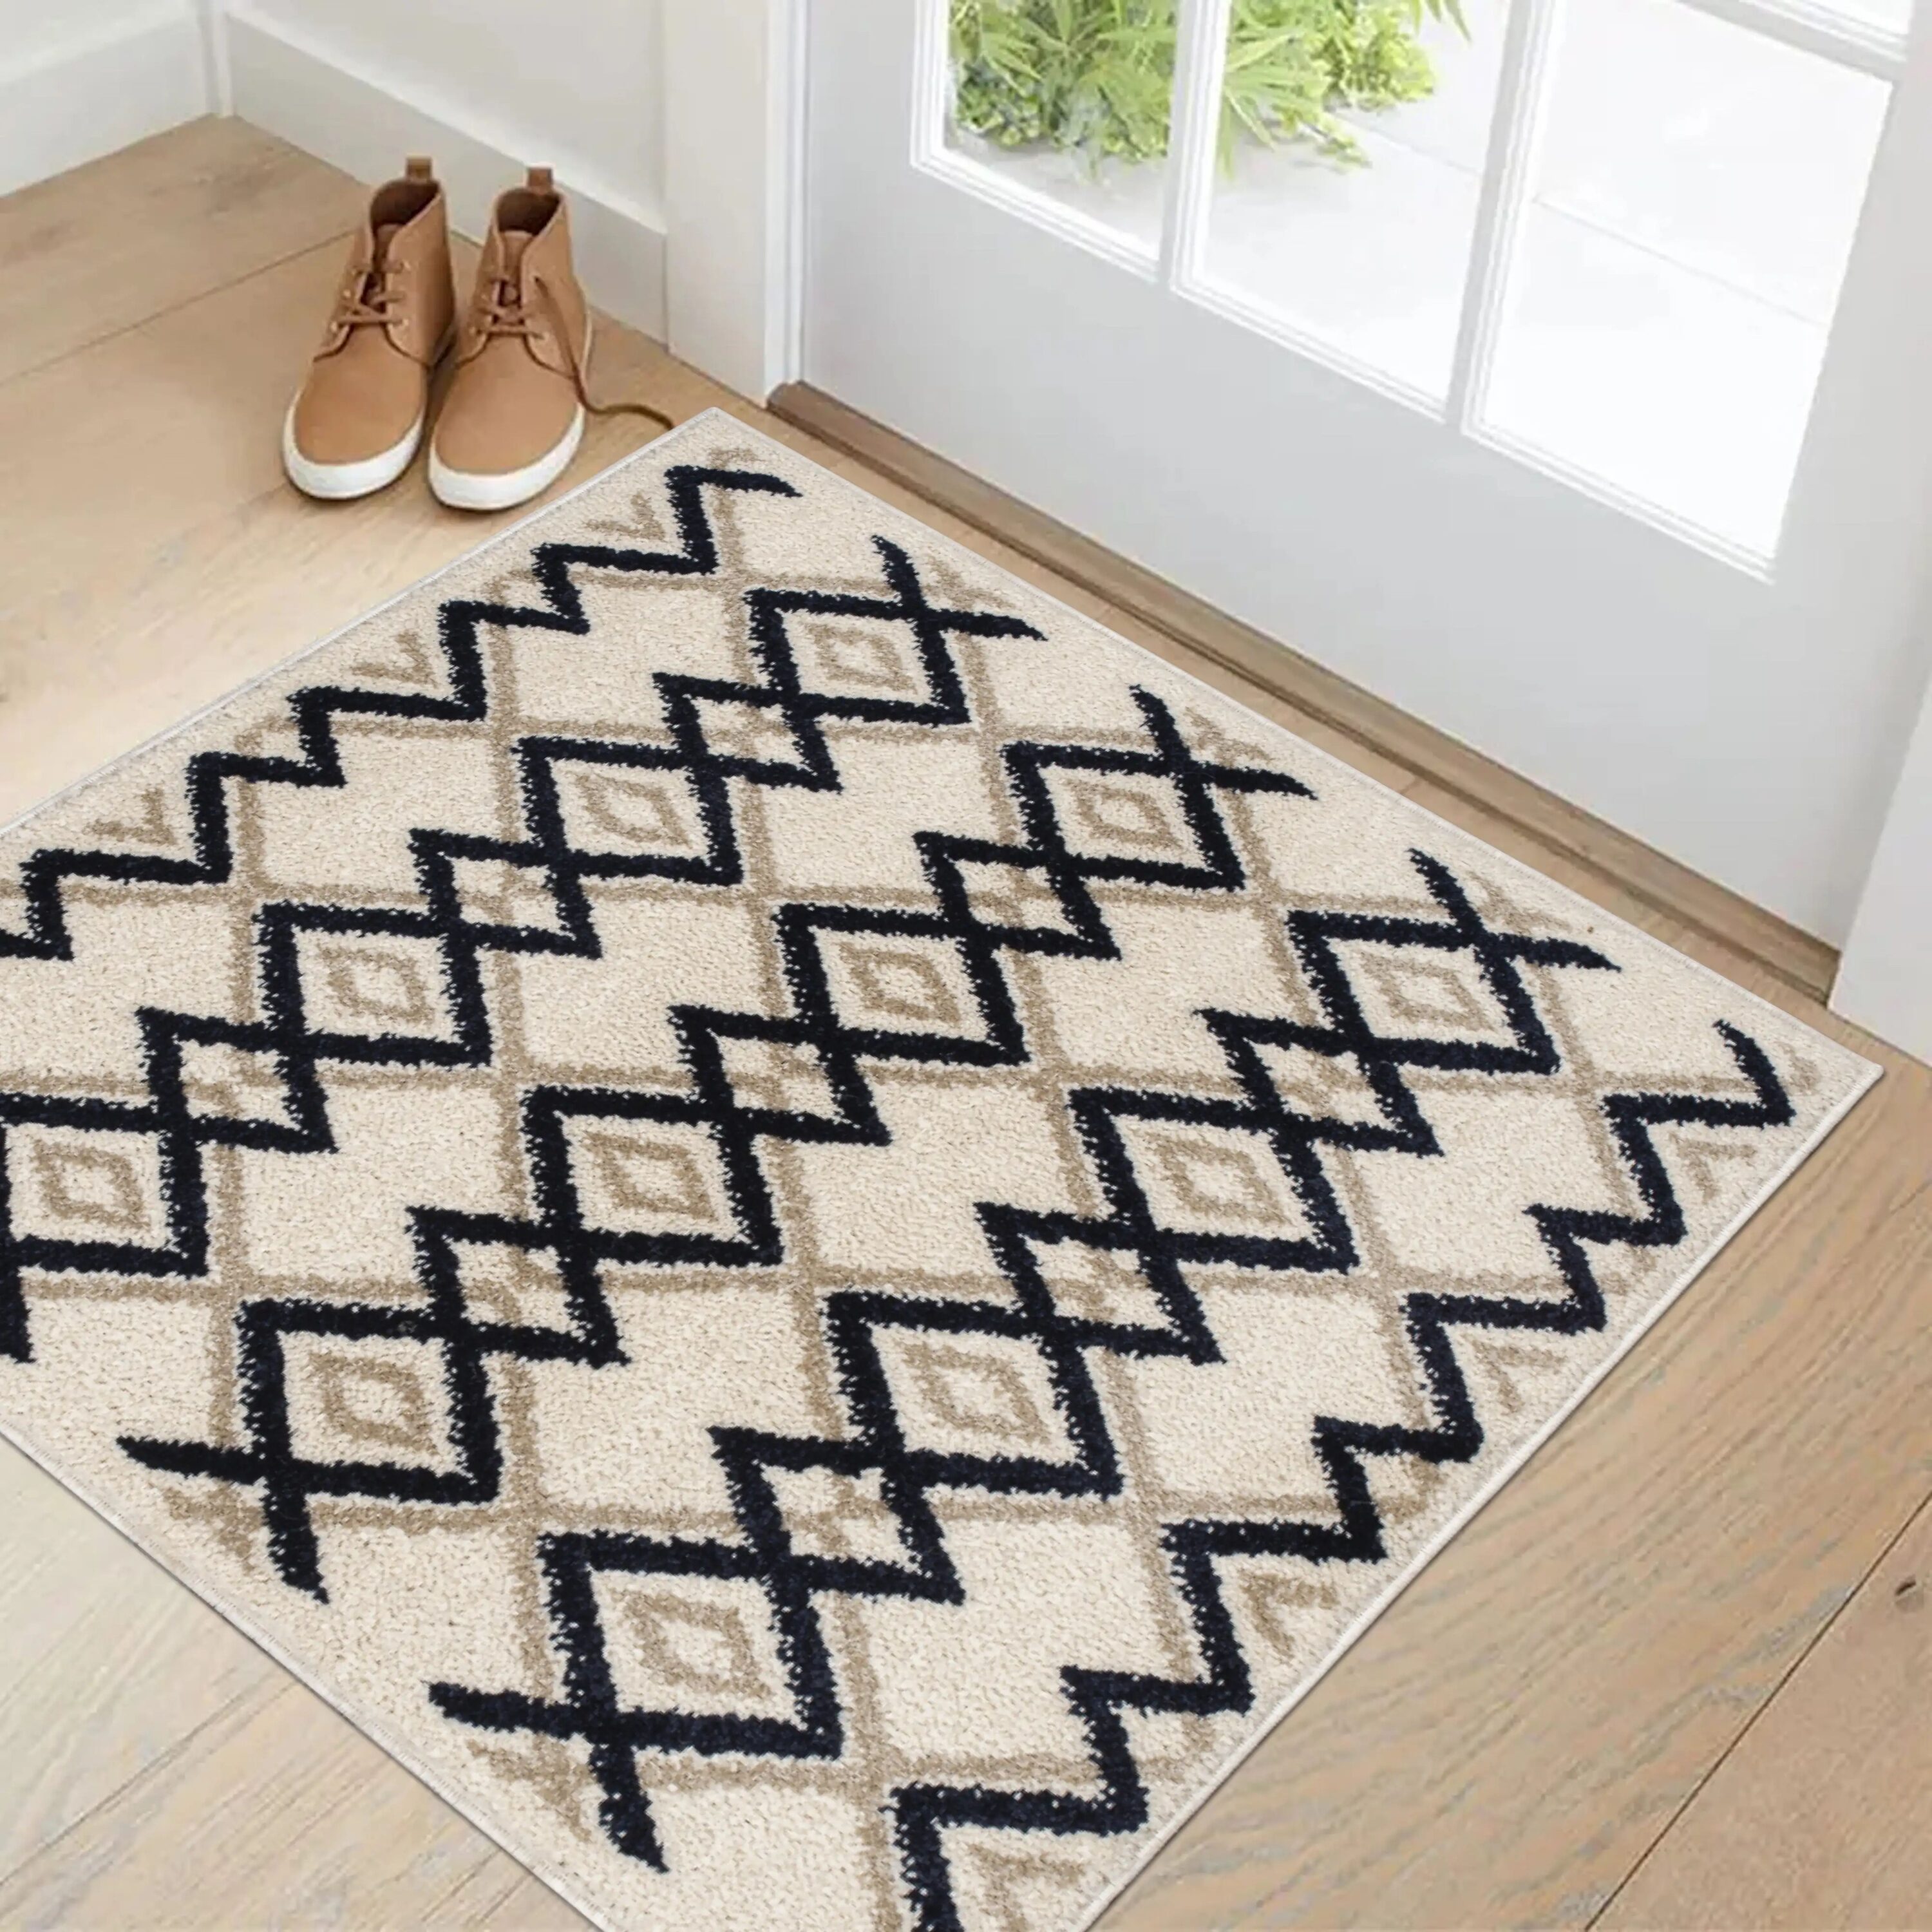 The Sofia Rugs Sofihas 2 Piece Kitchen Rug Sets 60in x 24in x 35in x 24in Kitchen  Floor Mats 100% Shag Polypropylene Farmhouse Washable Kitchen Rugs and Mats  with Non Skid Rubber